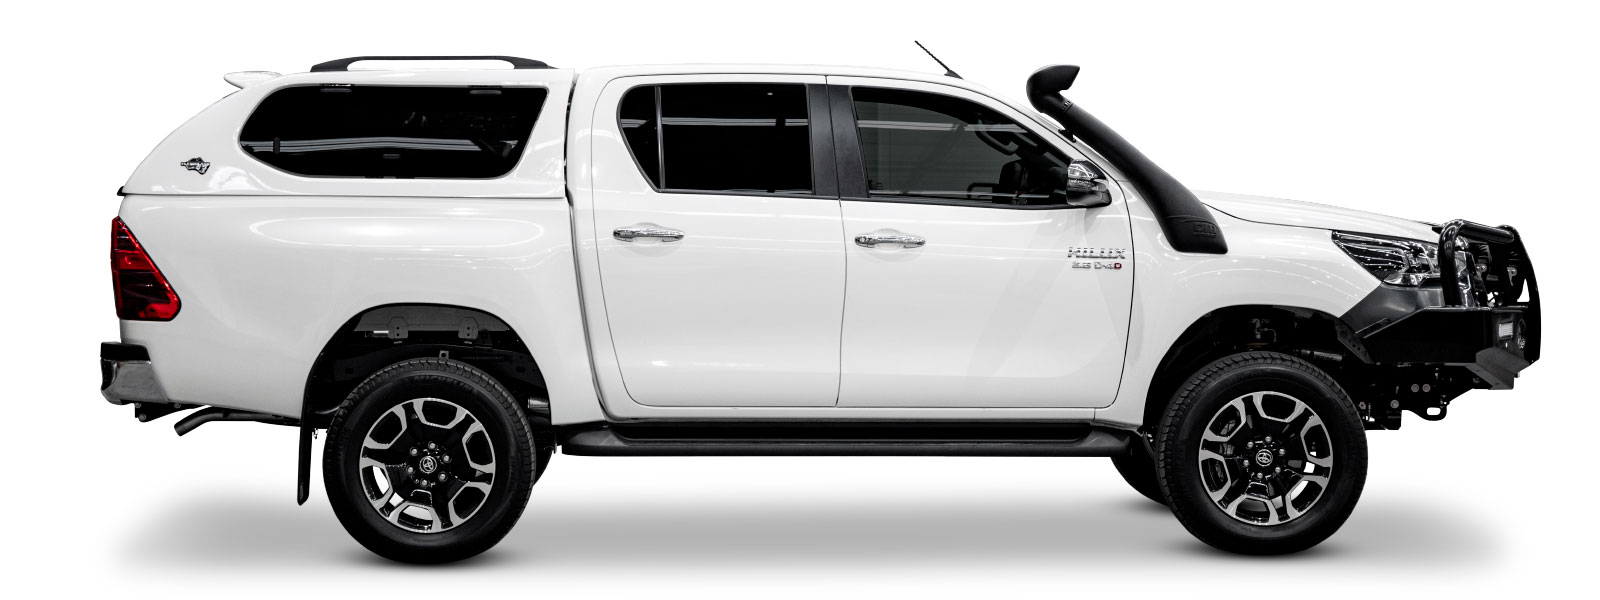 2020 Toyota Hilux Canopy Side-on